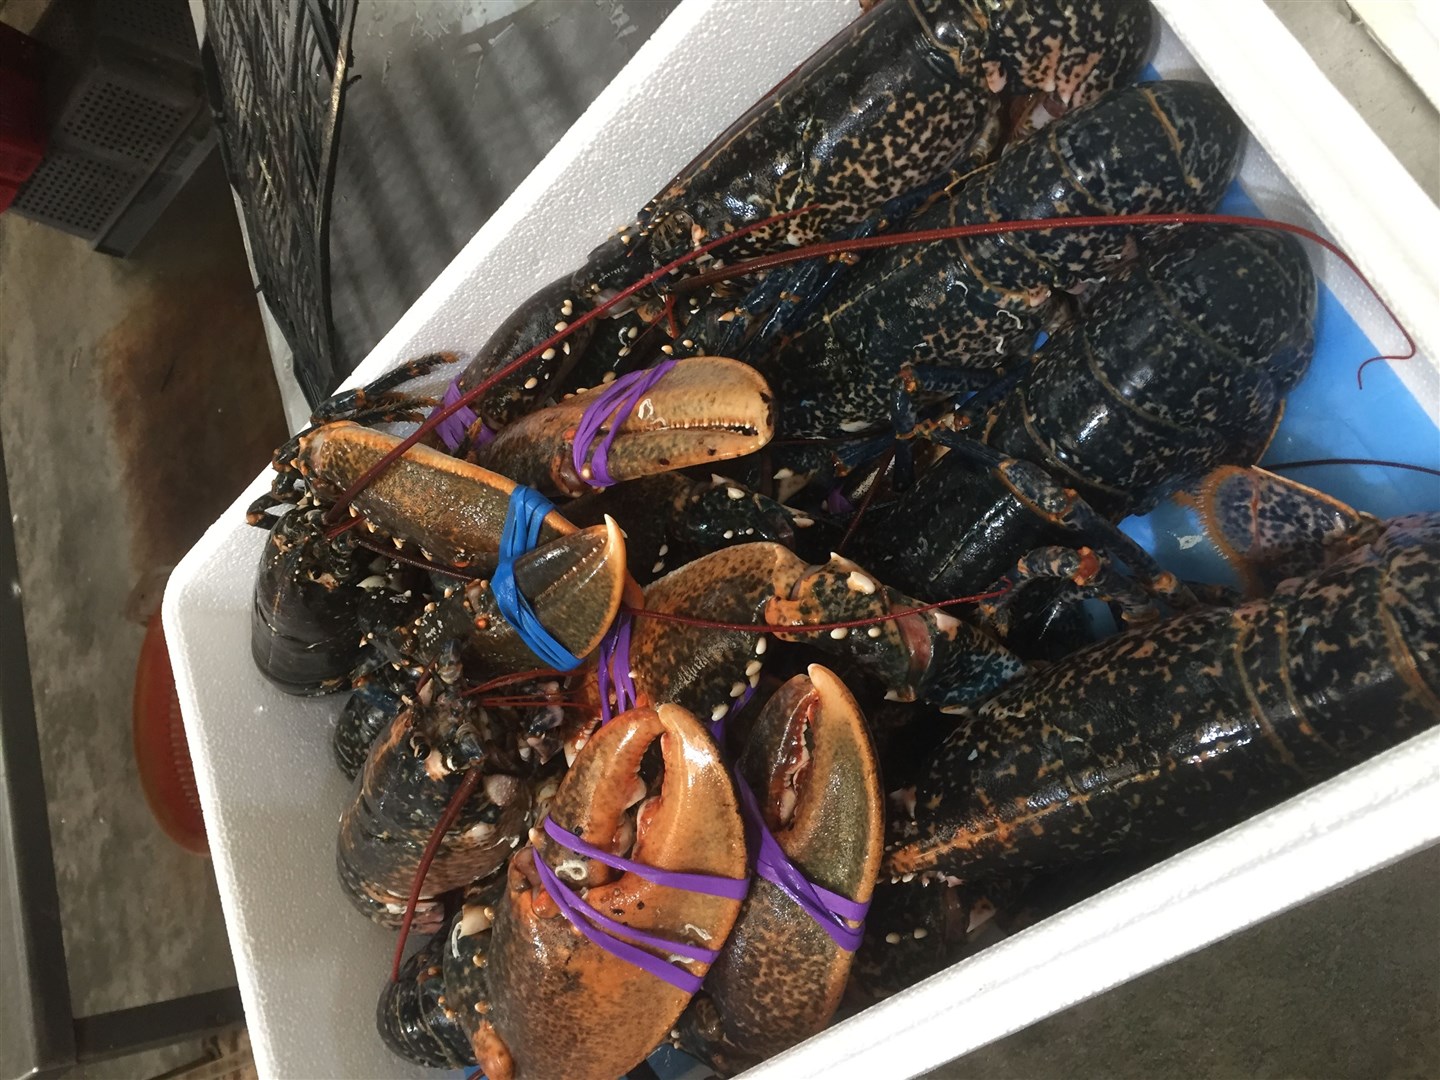 Live lobsters just hours out of the waters off Isle of Skye, procured from ScotWest Seafoods of Kyle of Lochalsh, who have suffered a significant downturn in exports and surge in lobster and langoustine mortality since Brexit.